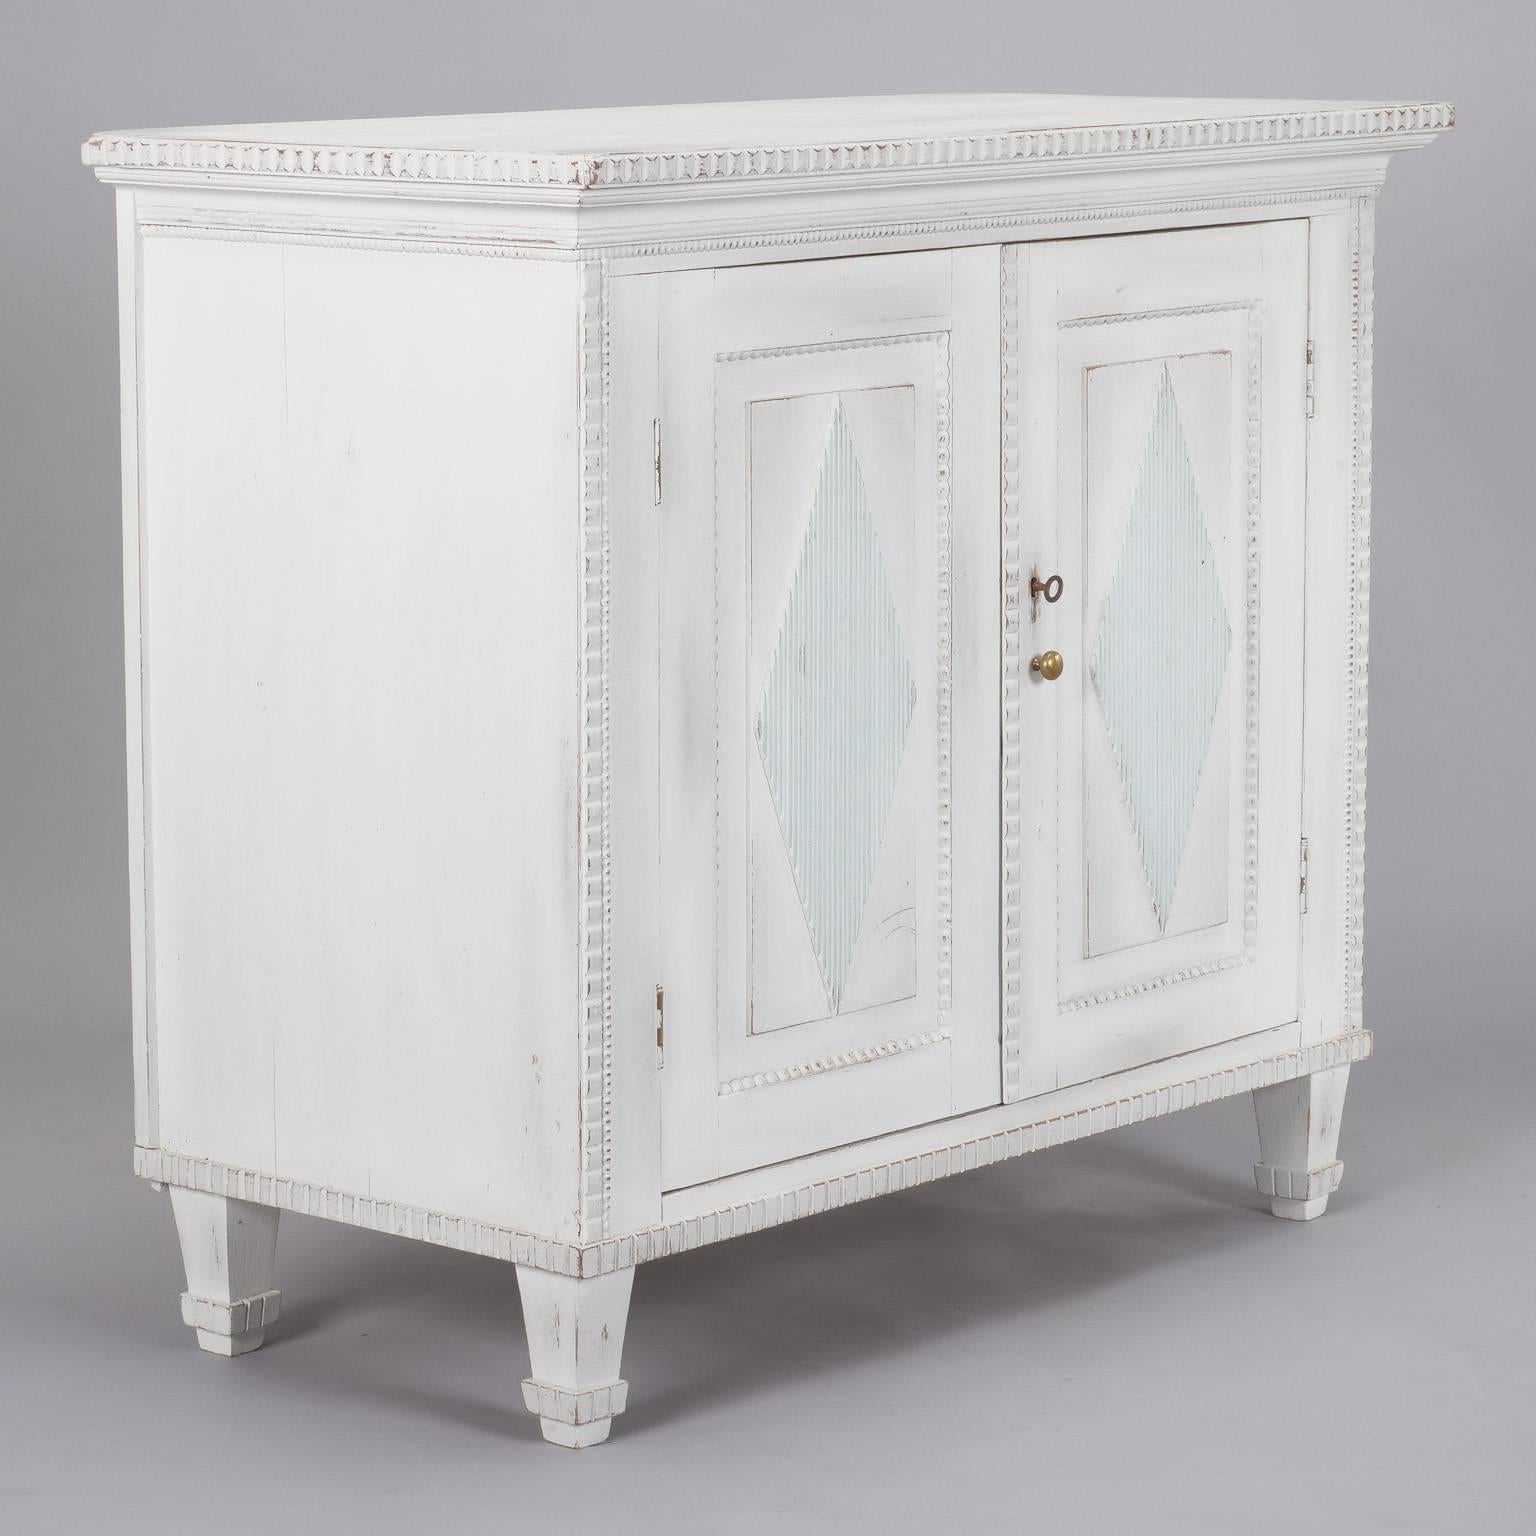 Swedish cabinet has two hinged doors, a single internal shelf and white painted finish with subtle contrast on carved diamond detail, circa 1900. Carved details along edges and legs, working key lock.